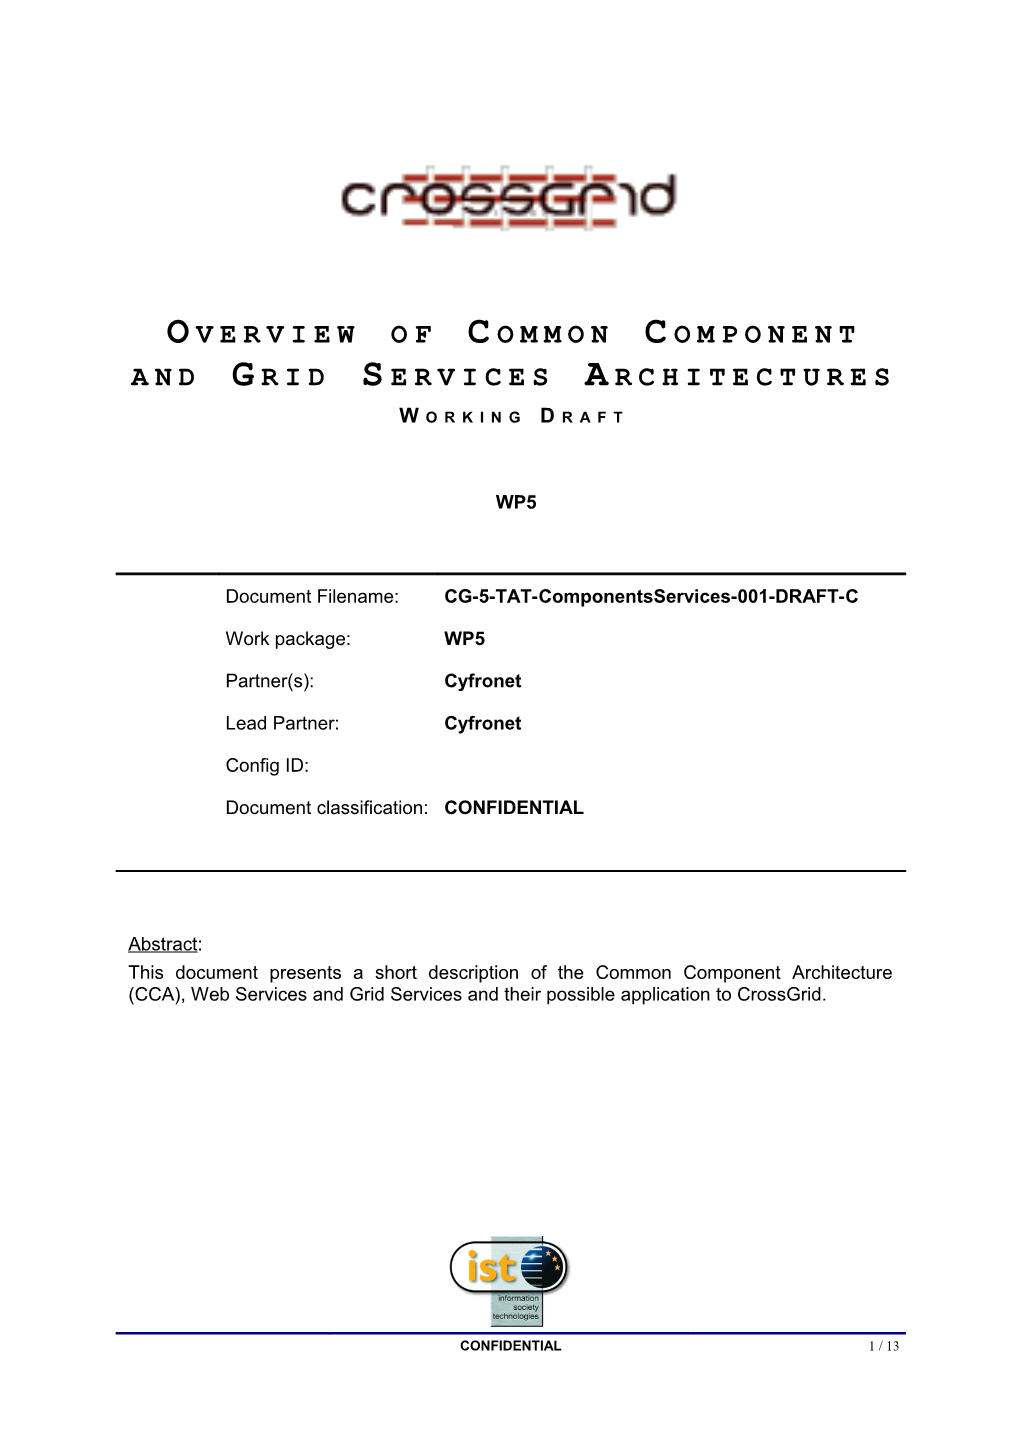 Overview of Common Component and Grid Services Architectures